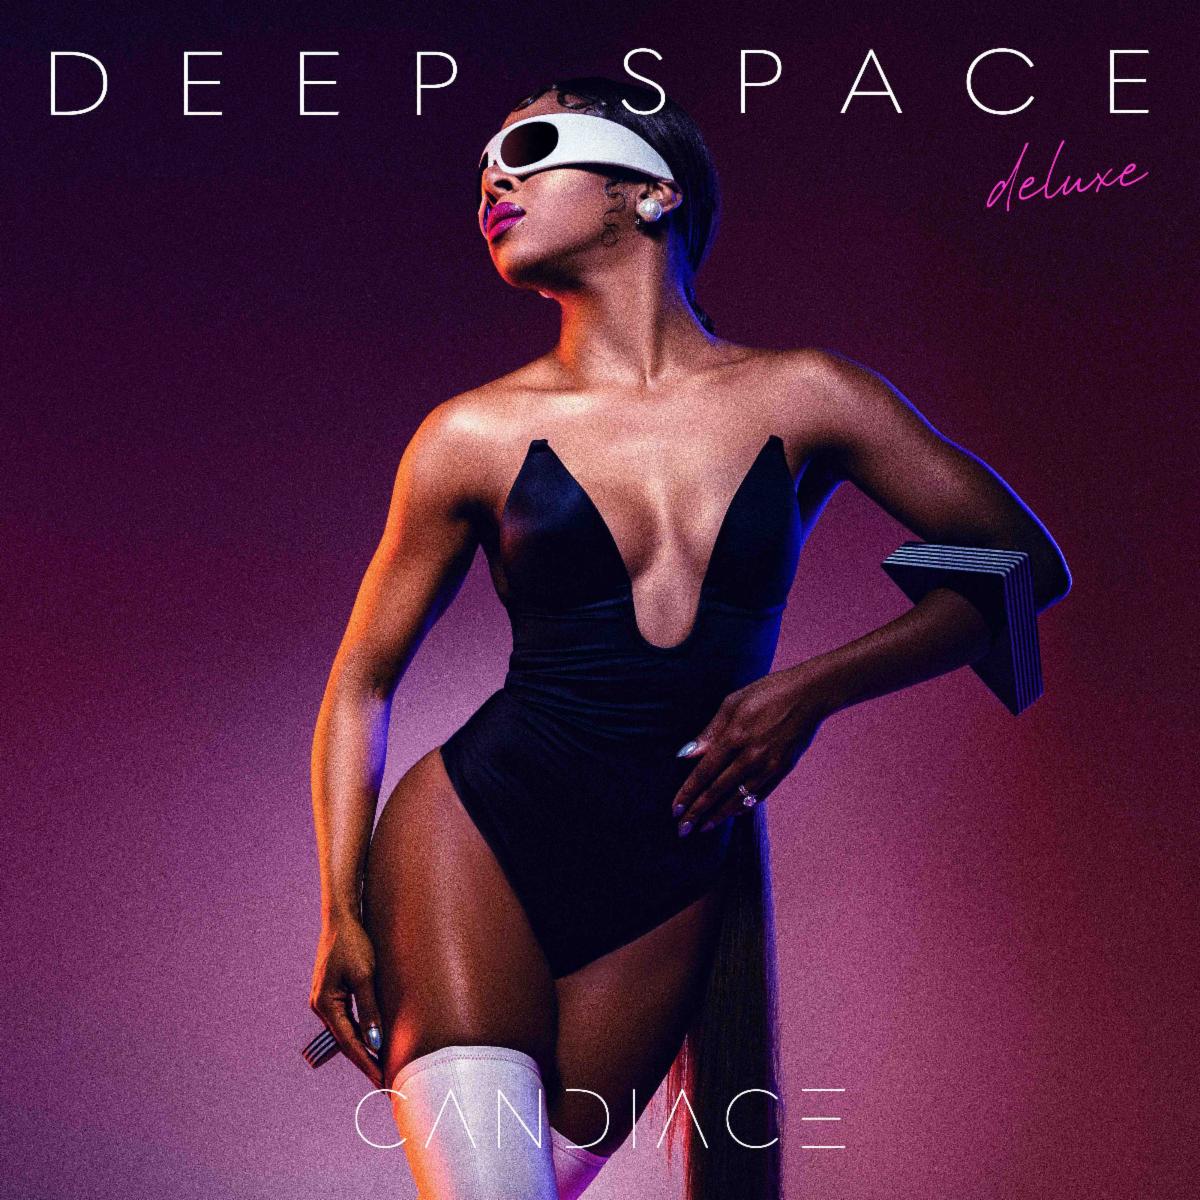 Candiace "Insecure" and "Deep Space Deluxe" artwork